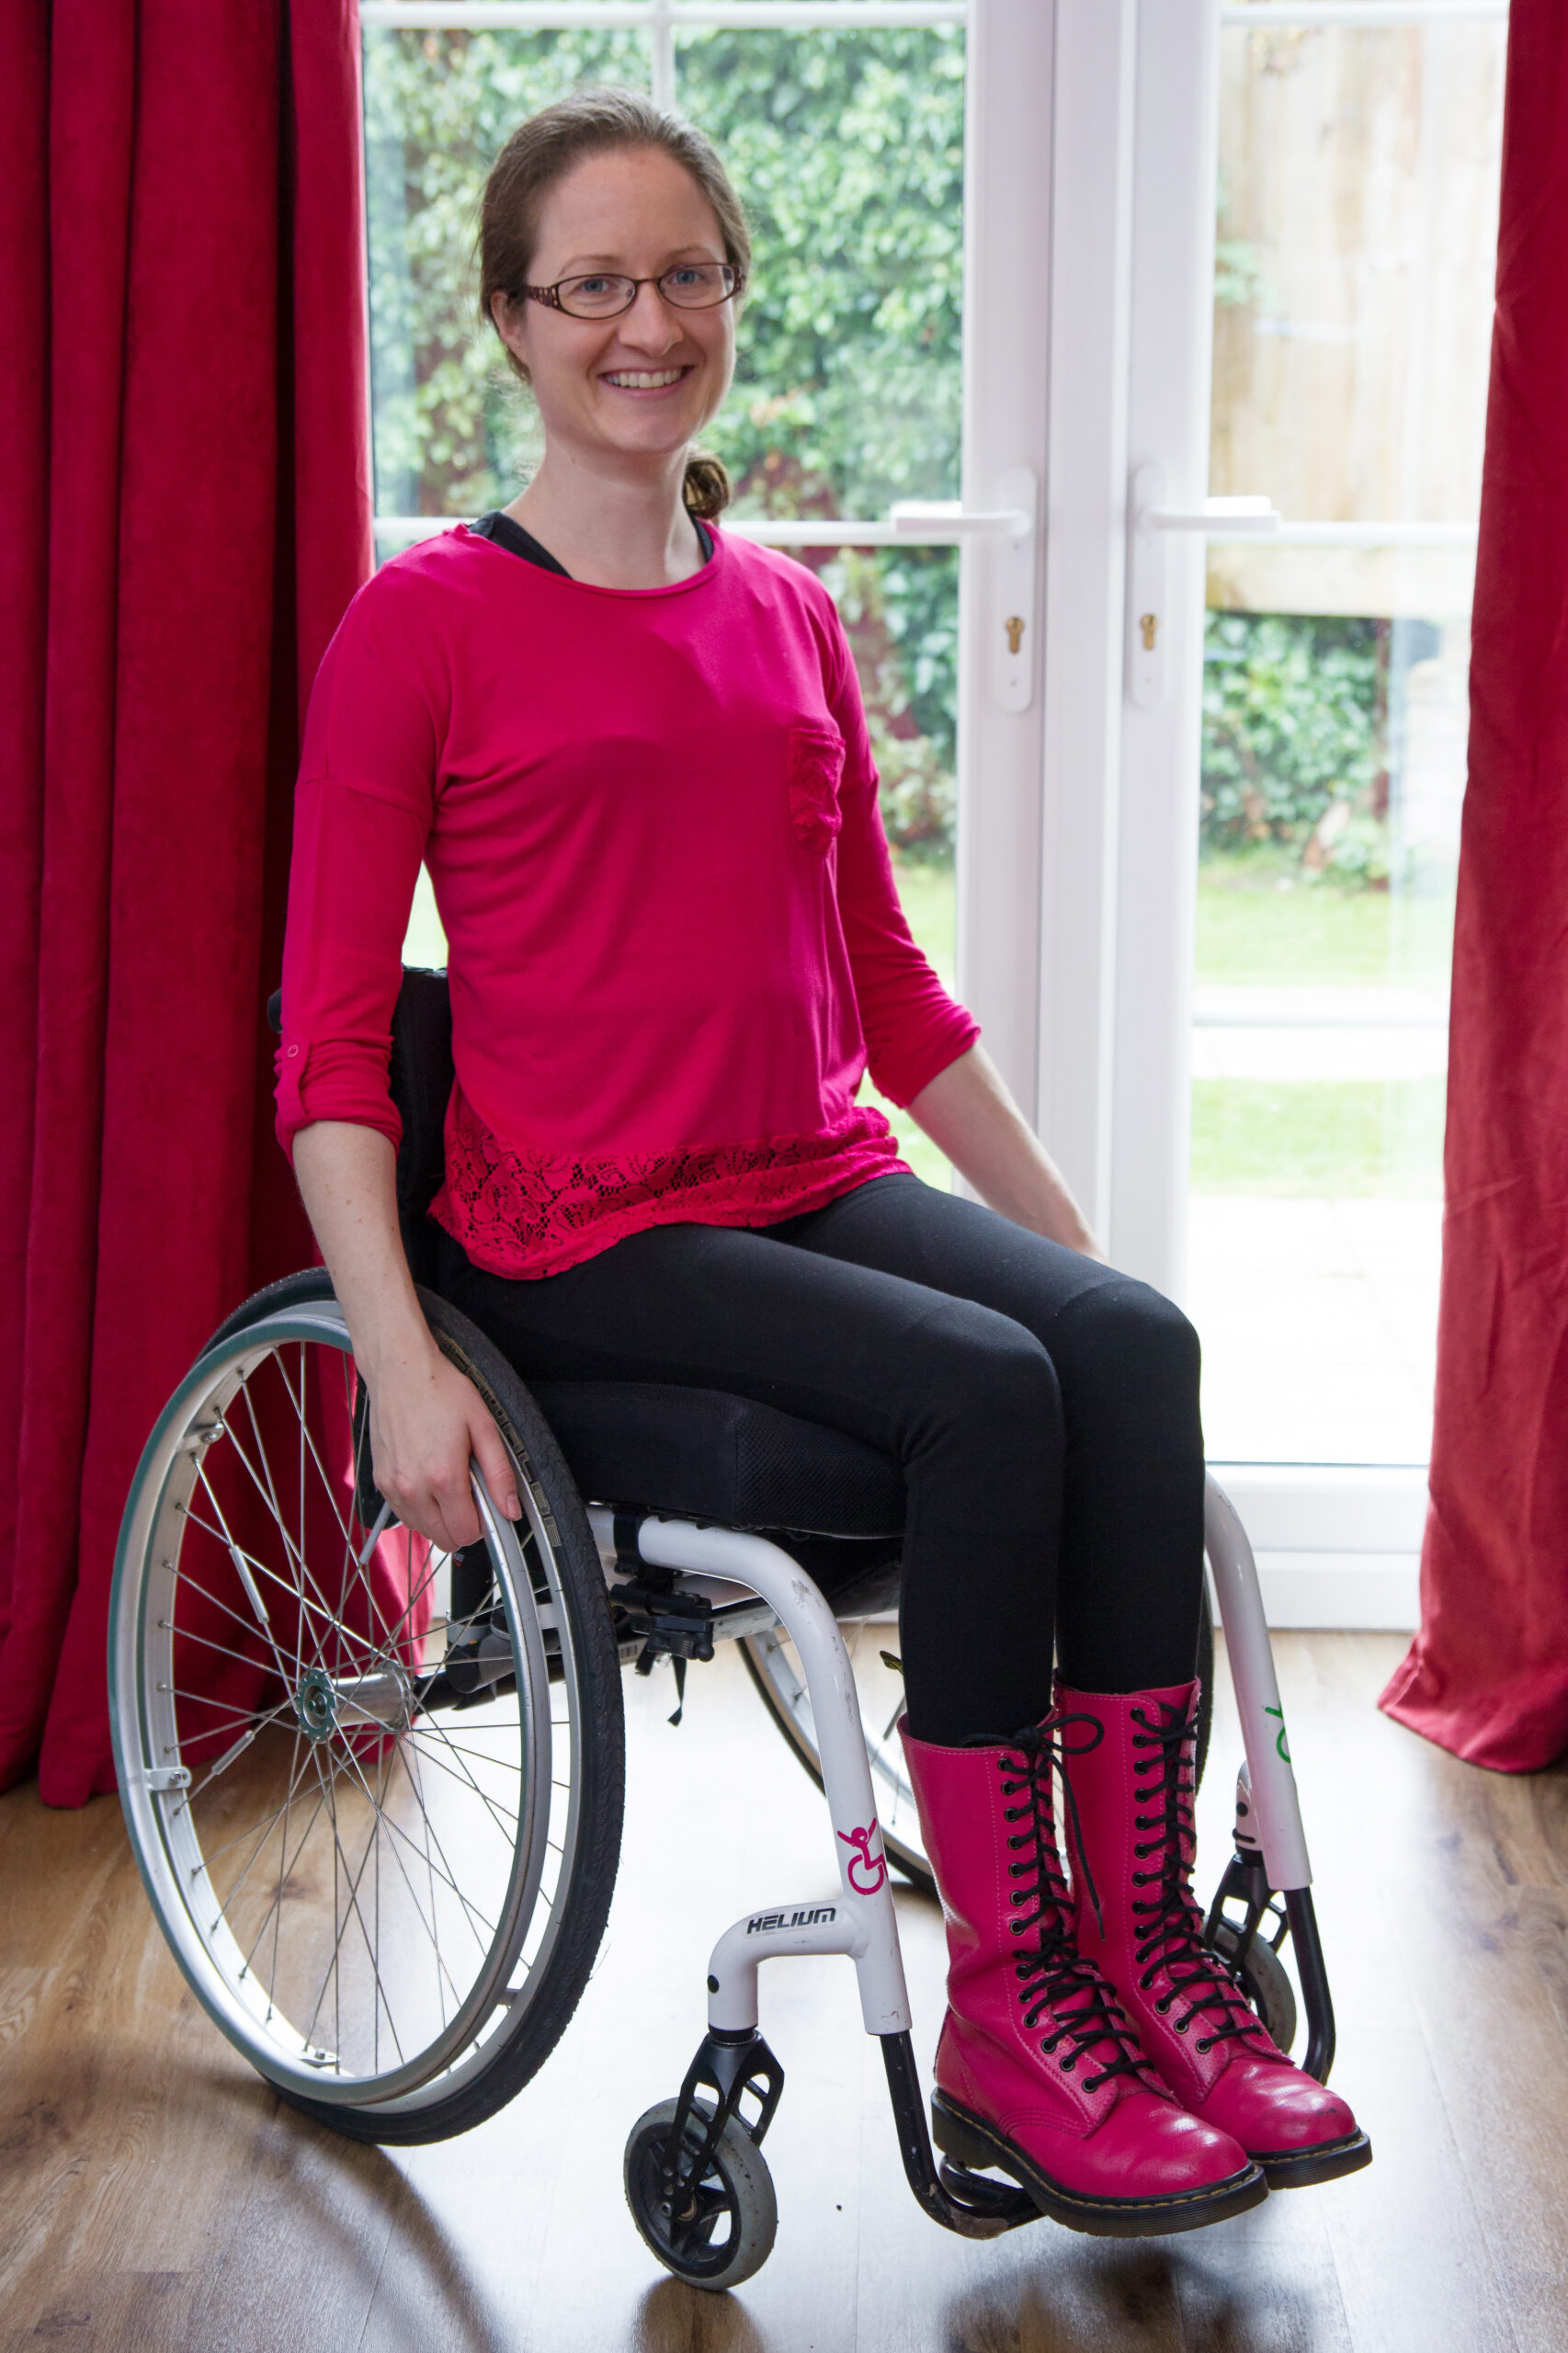 hannah sat in her wheelchair in a bright pink top smiling